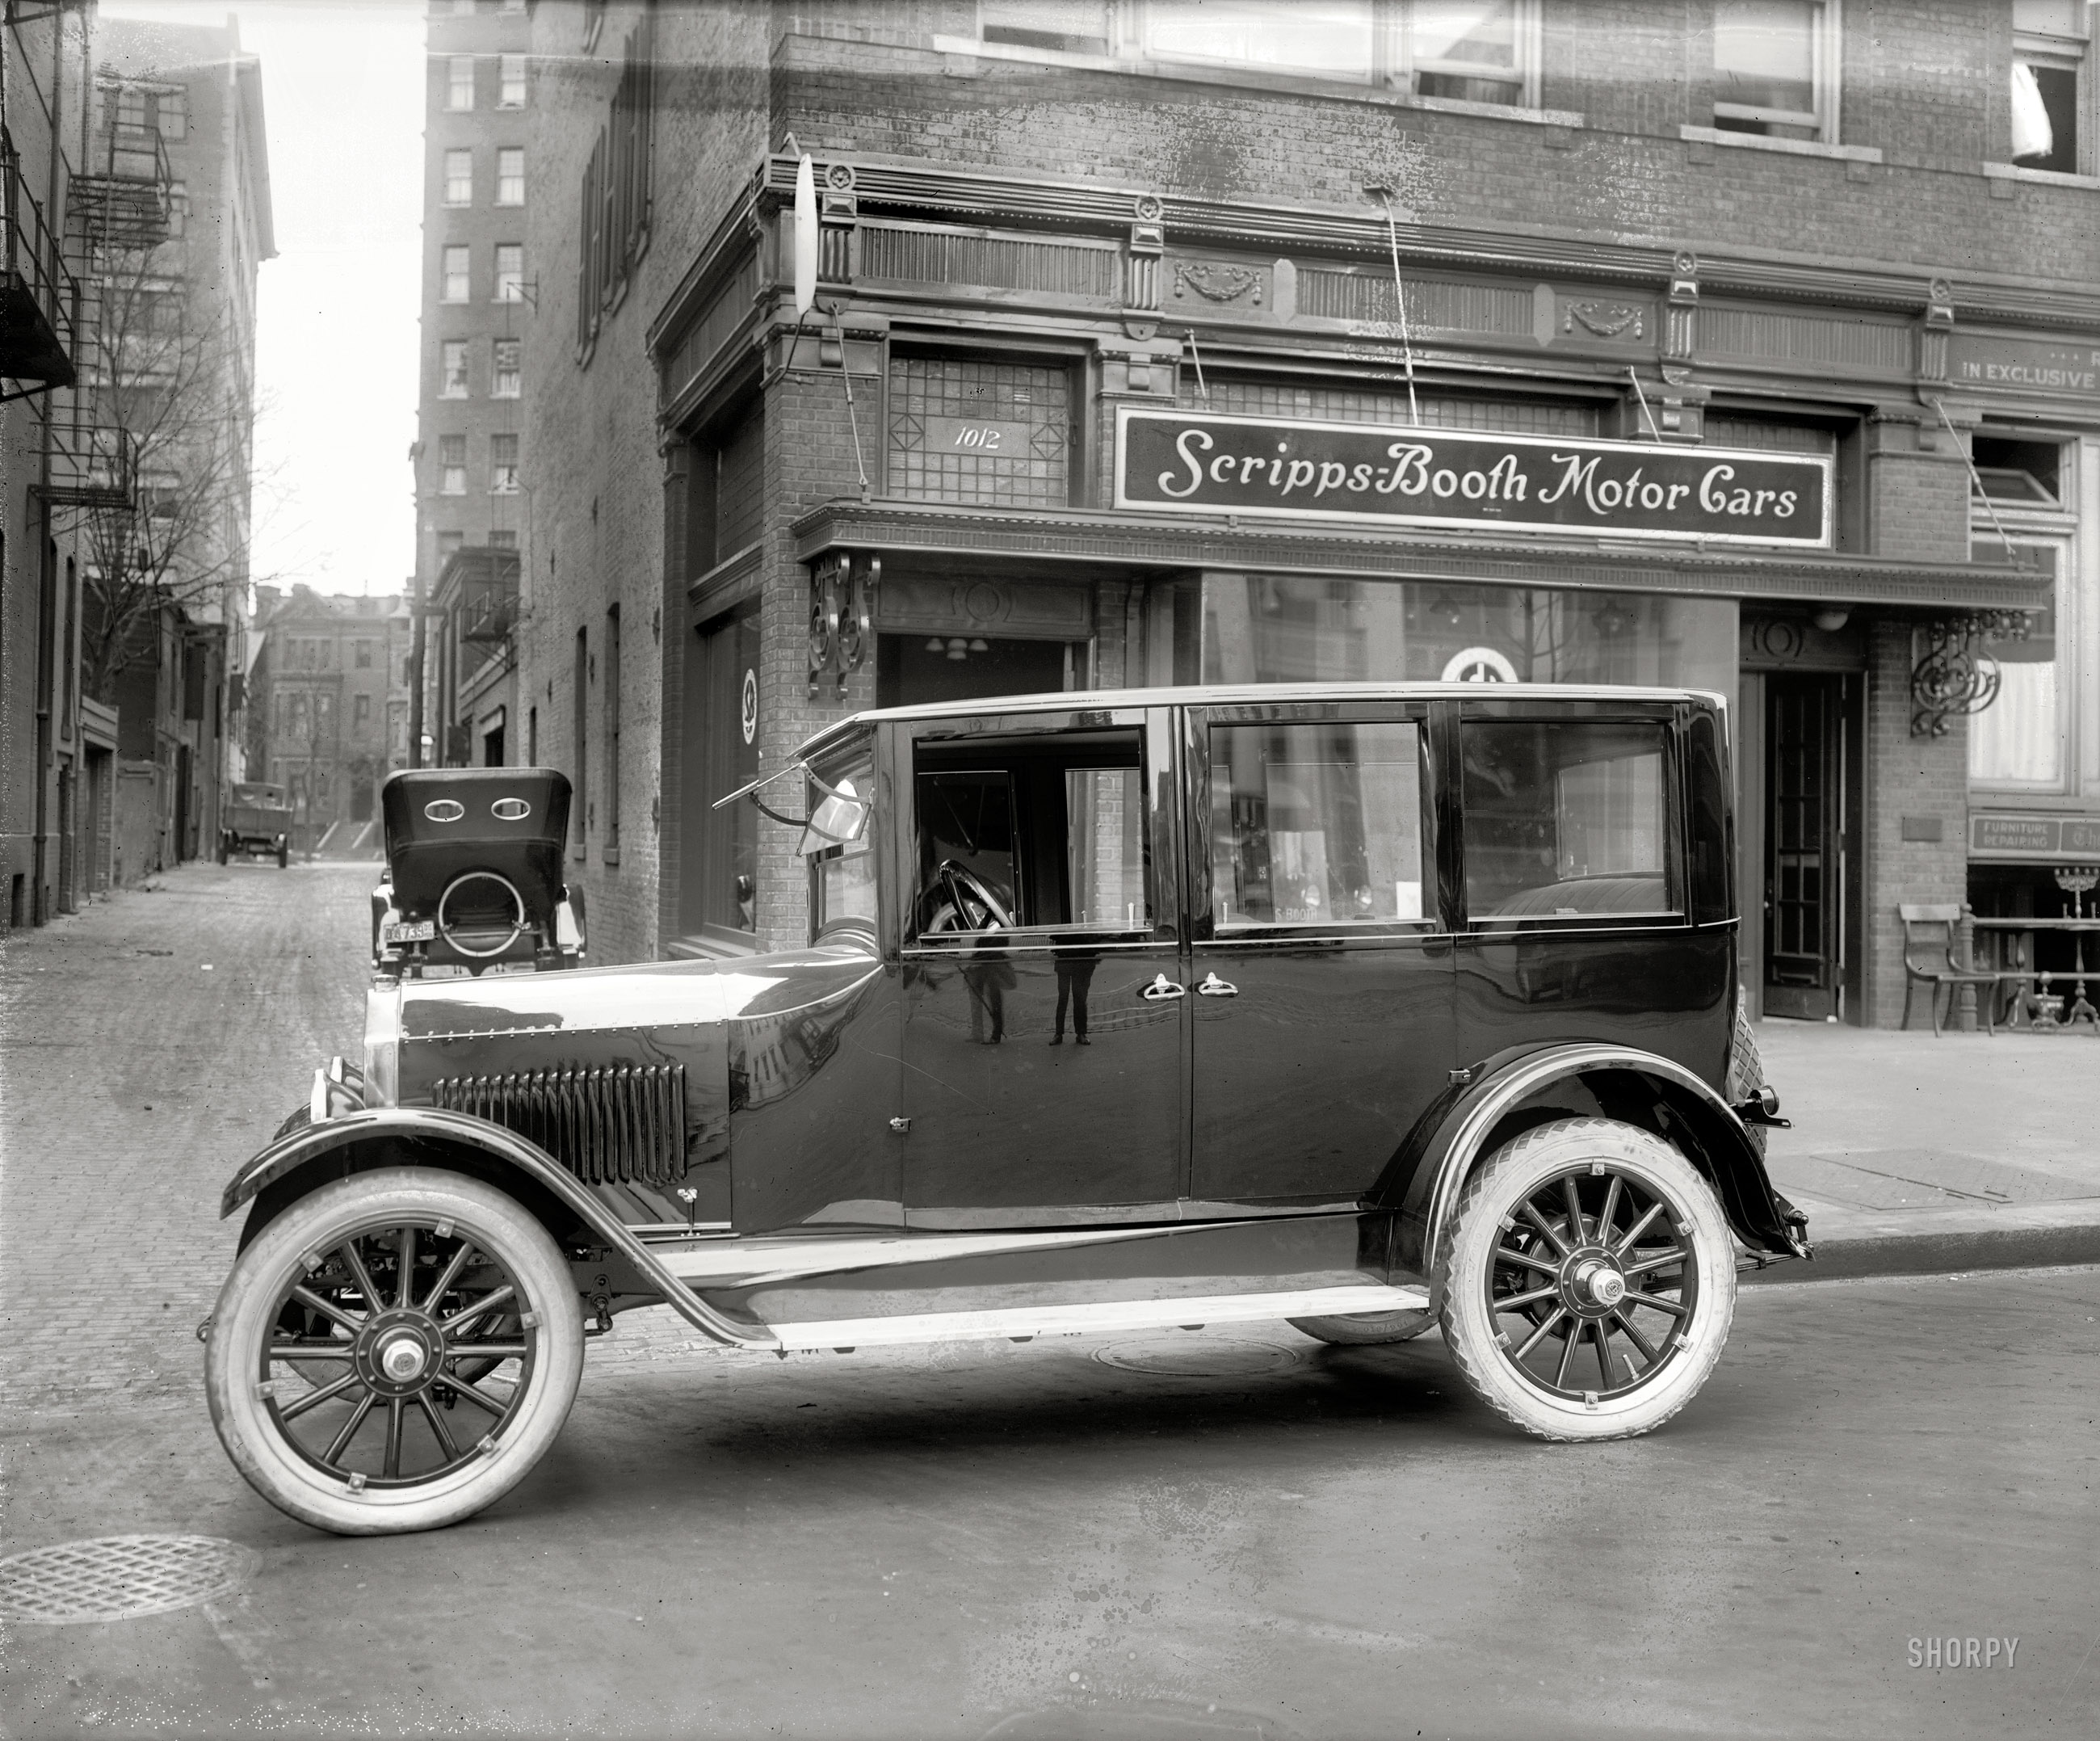 Washington, D.C, 1921. "Scripps-Booth Sales Co., 14th Street N.W." And one very shiny sedan. National Photo Company Collection glass negative. View full size.